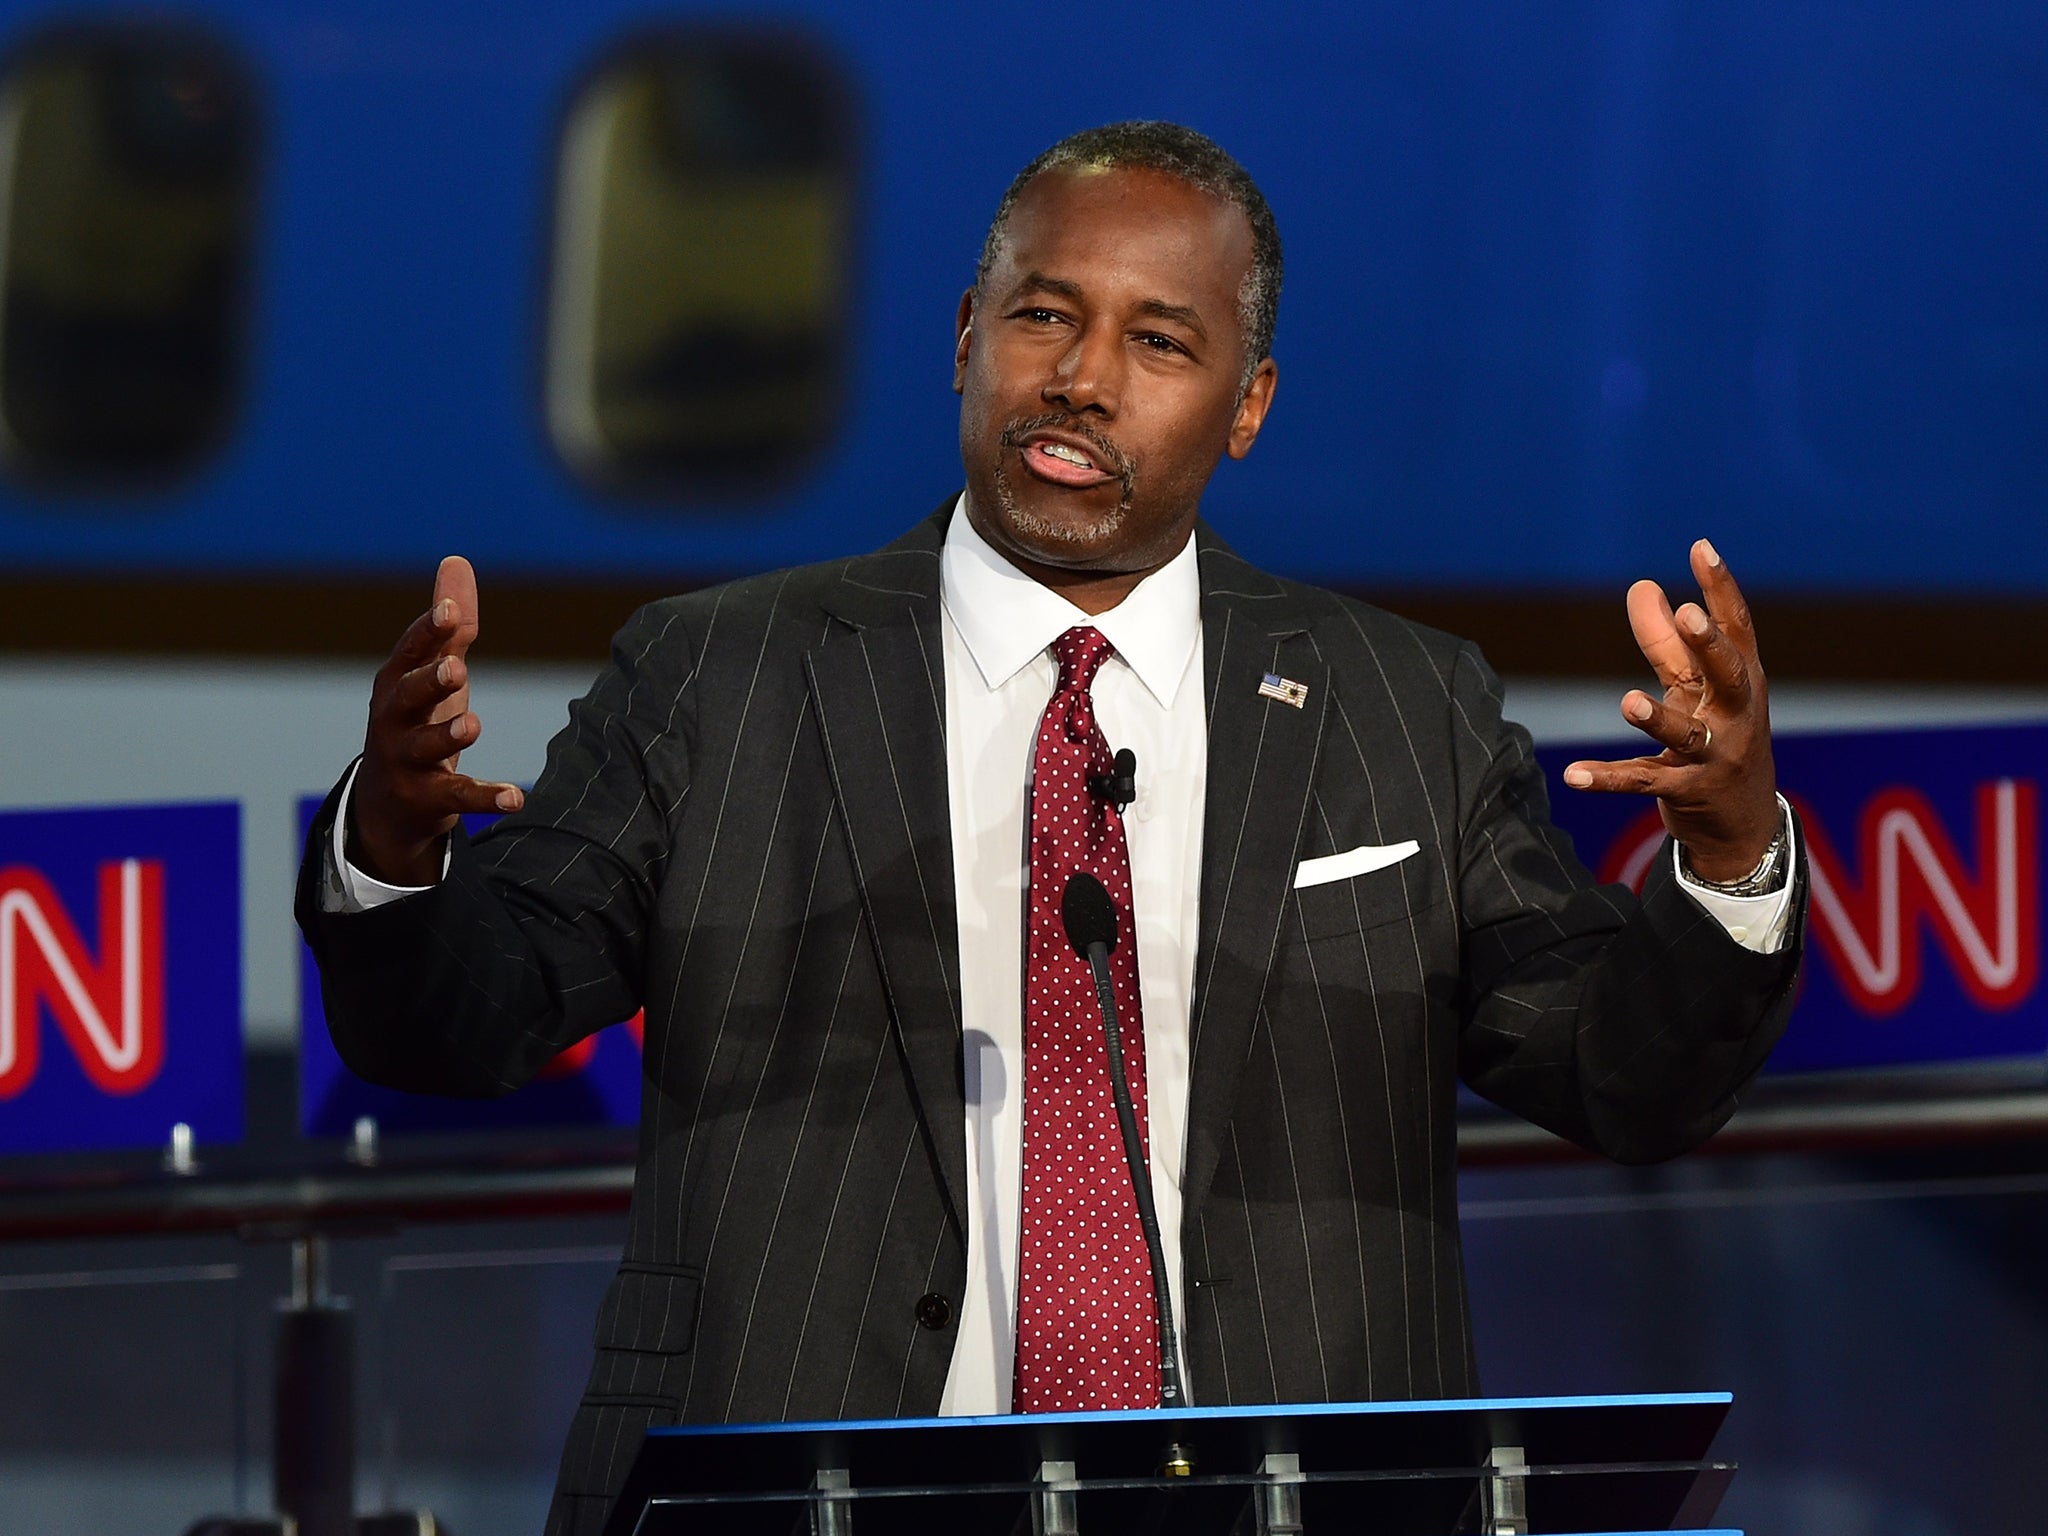 Dr Carson's home appeared to be "homage" to himself, commentators have said